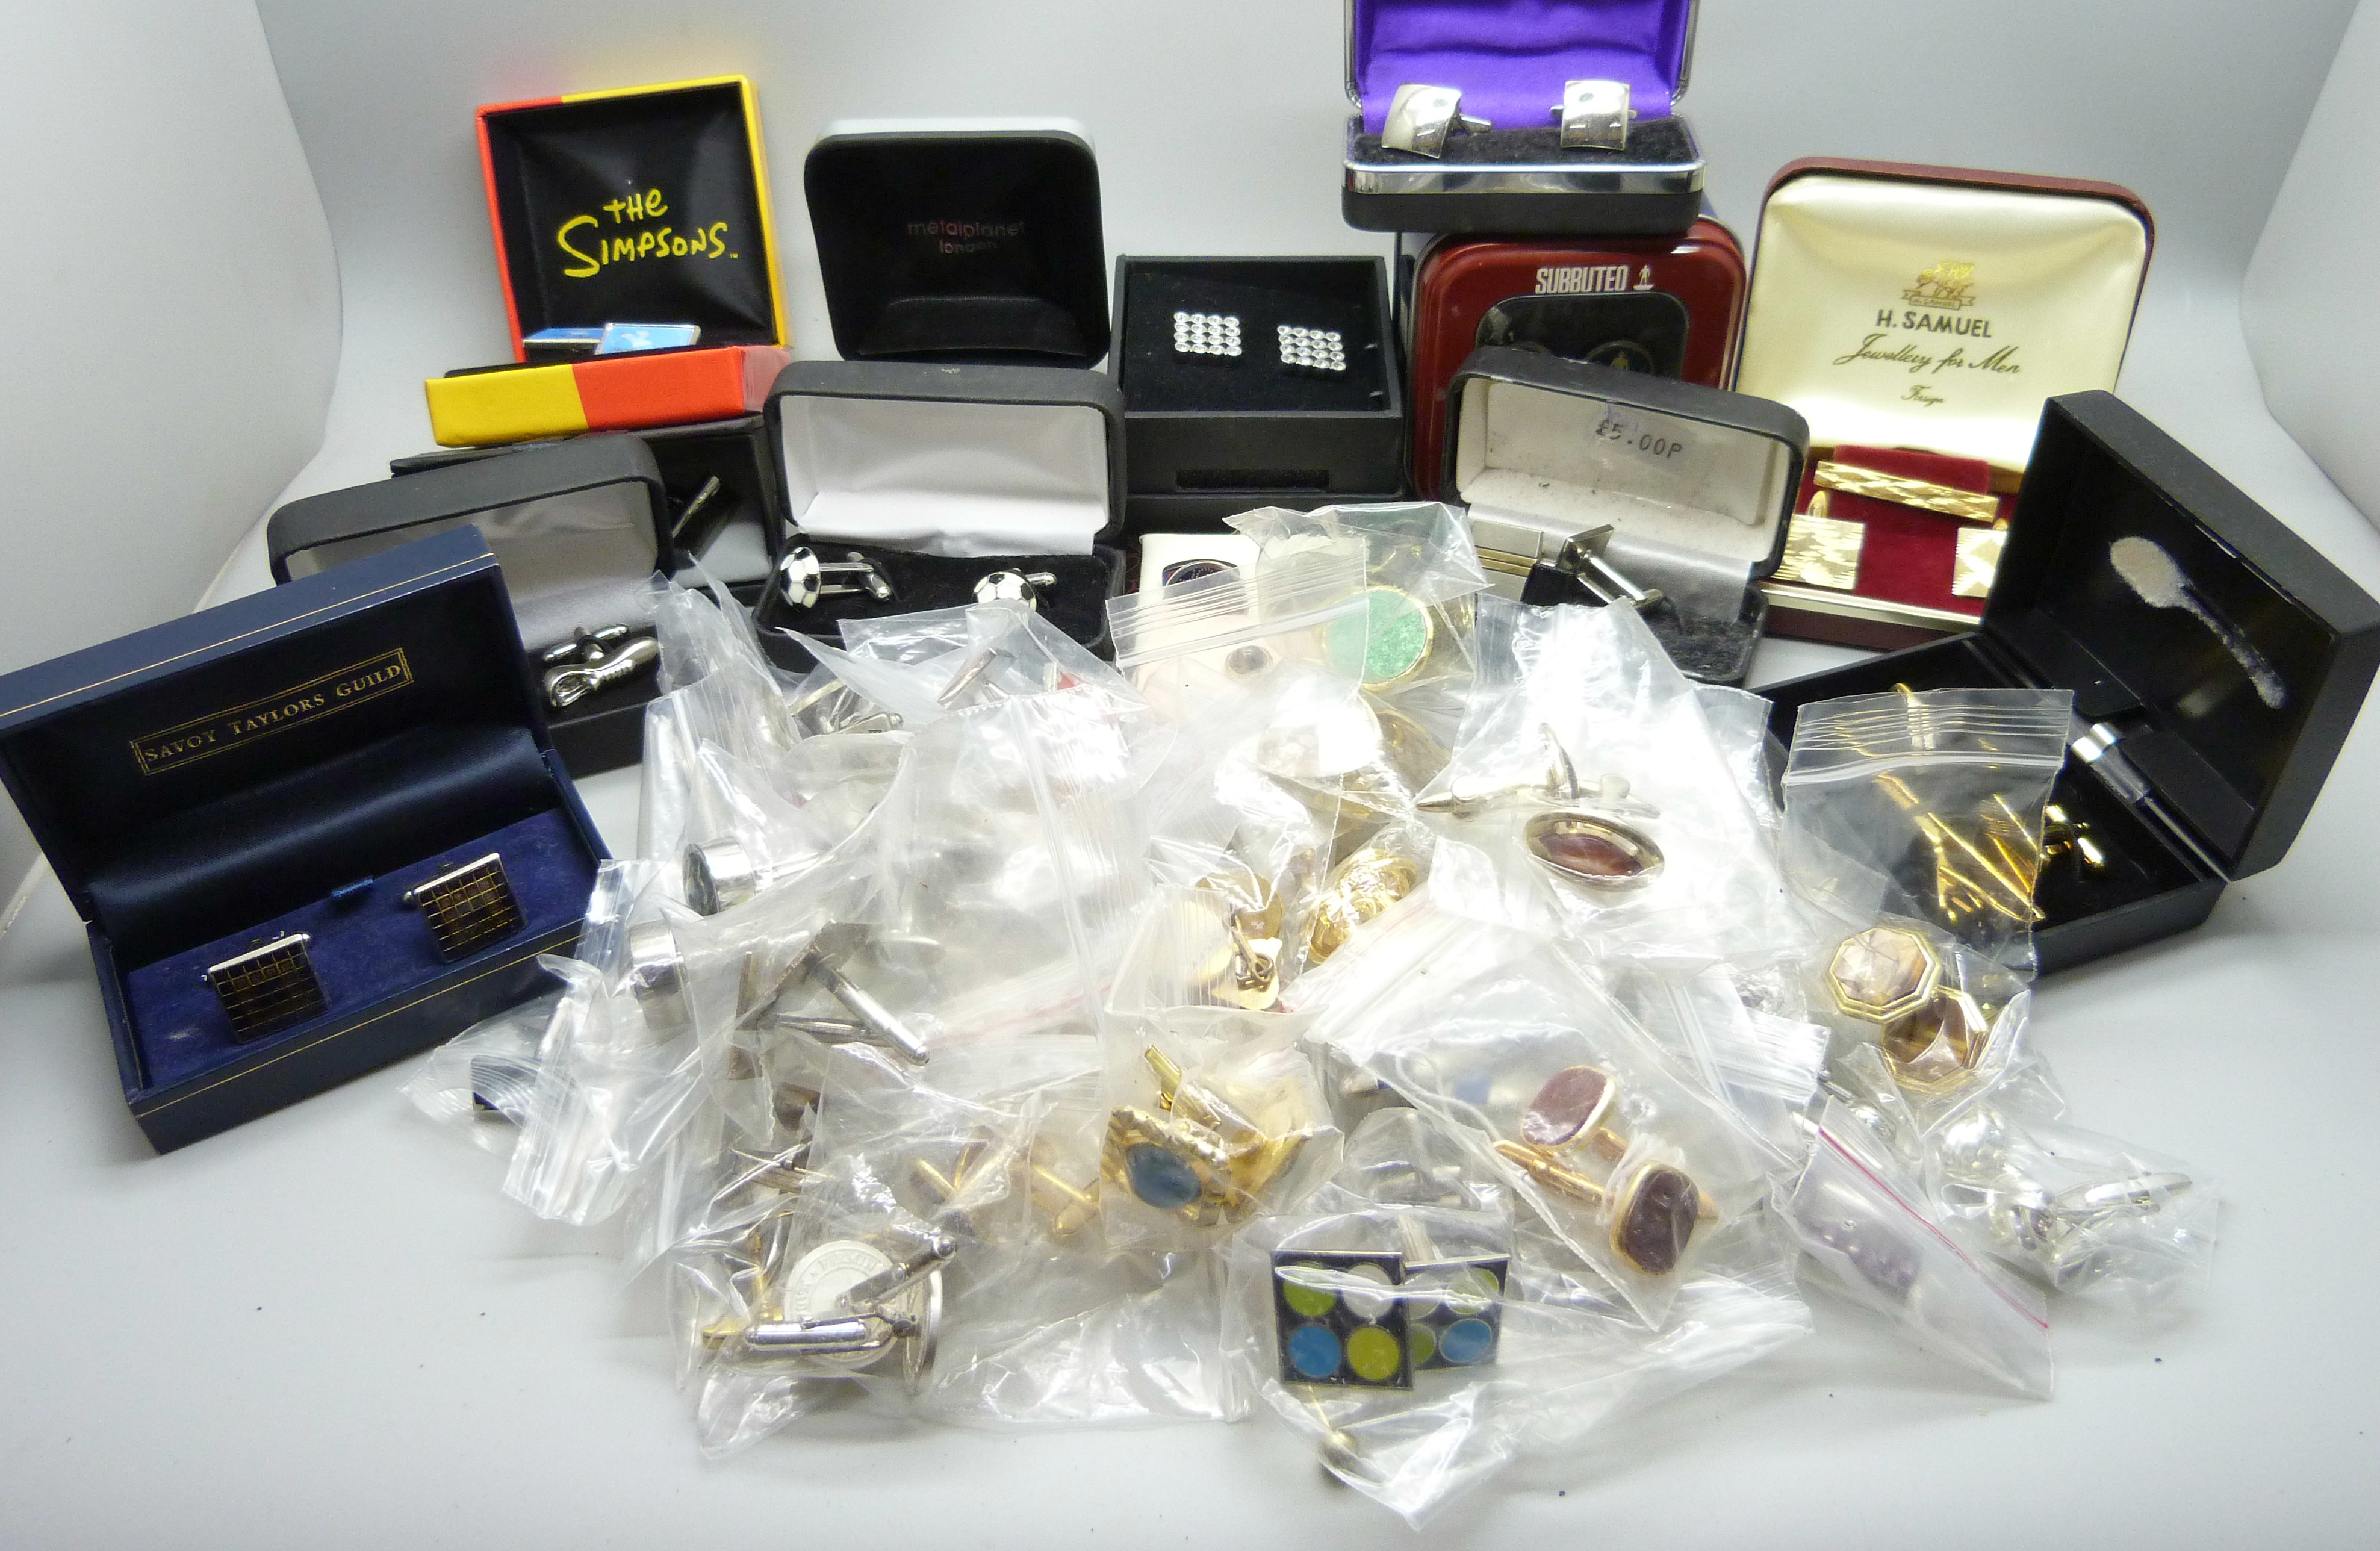 A collection of of cufflinks and tie-pins, some boxed